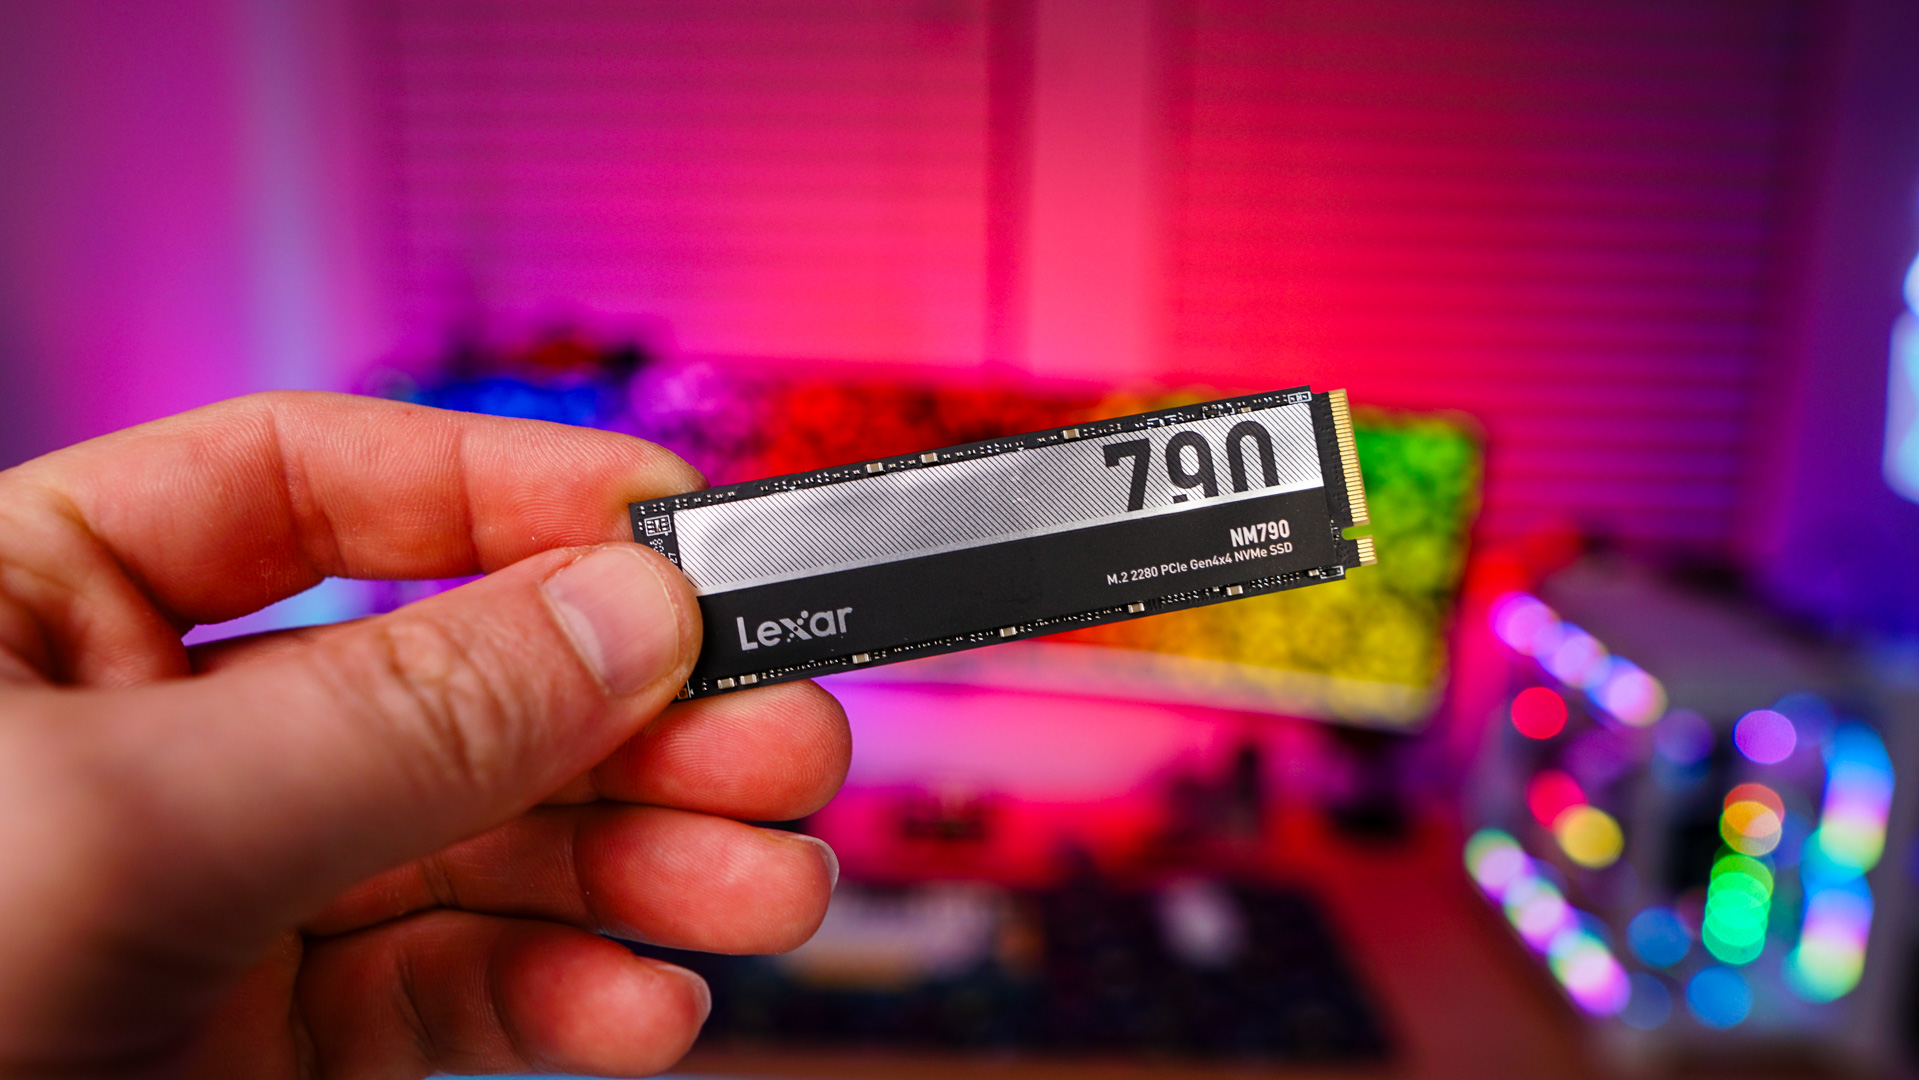 Lexar NM790 Gen4 Solid State Drive Review